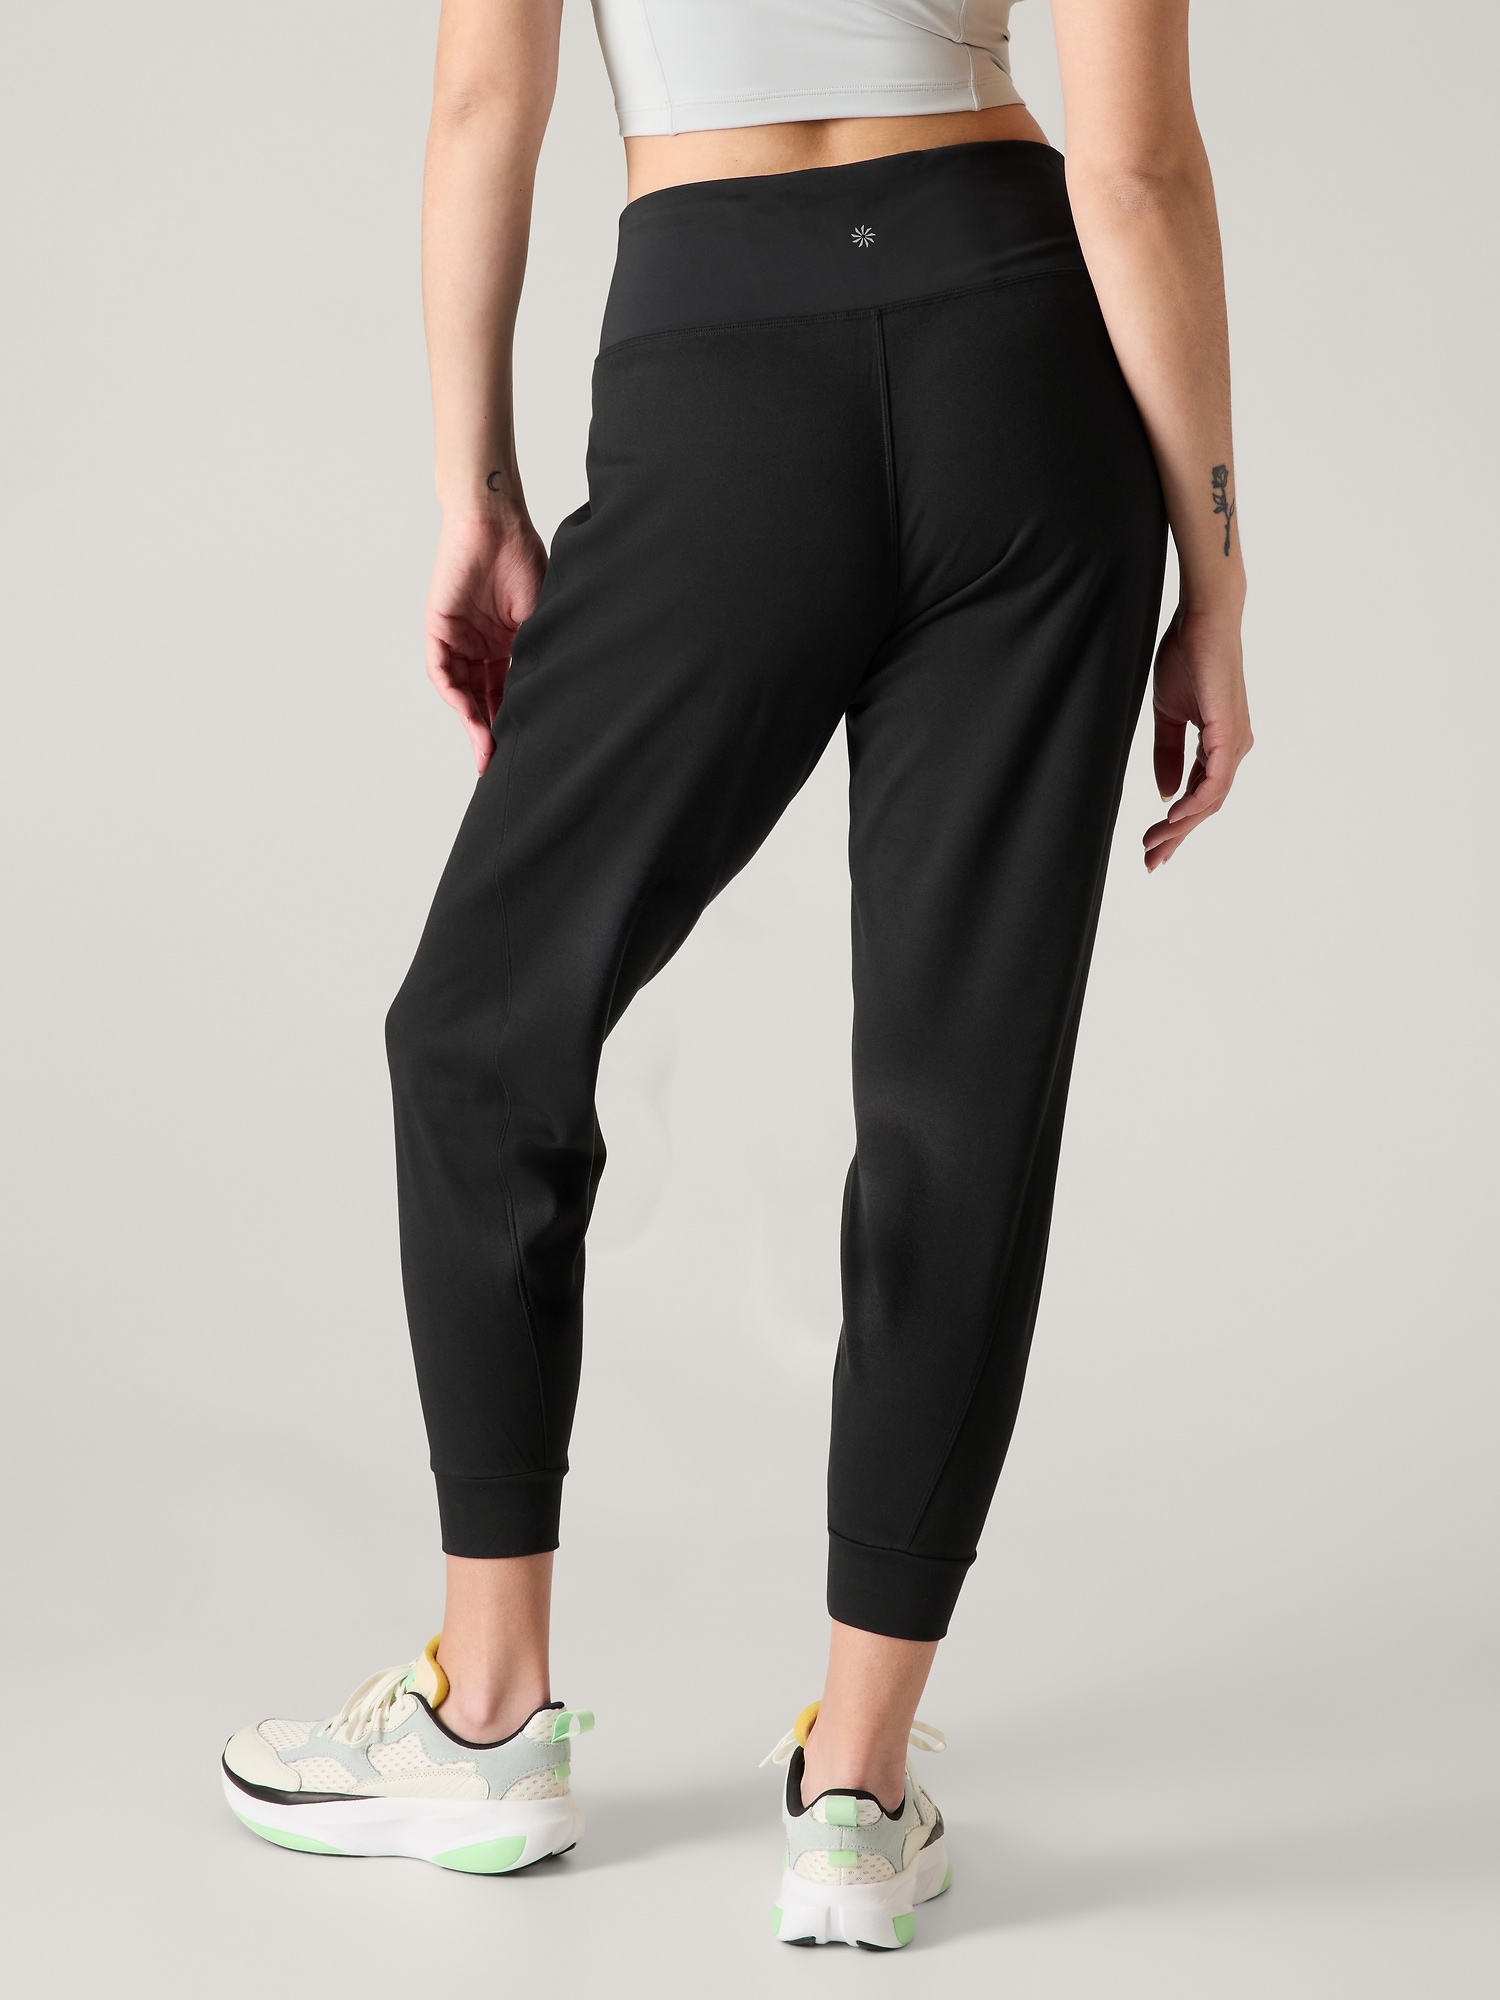 Lululemon Align Jogger Crop 23 True Navy new and free shipping